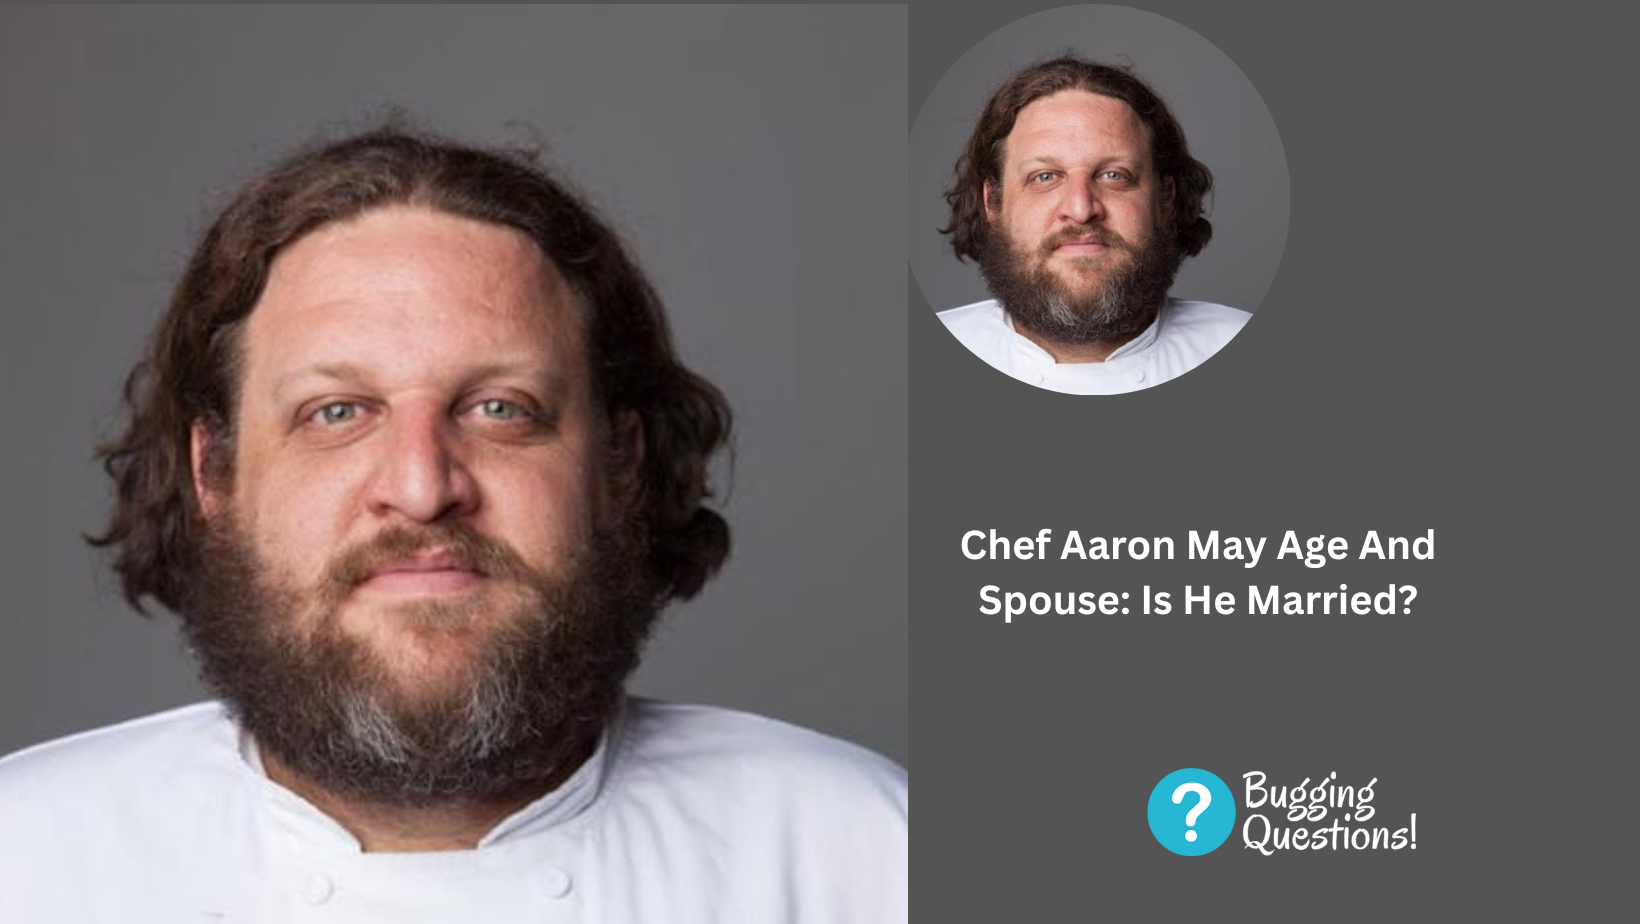 Chef Aaron May Age And Spouse: Is He Married?